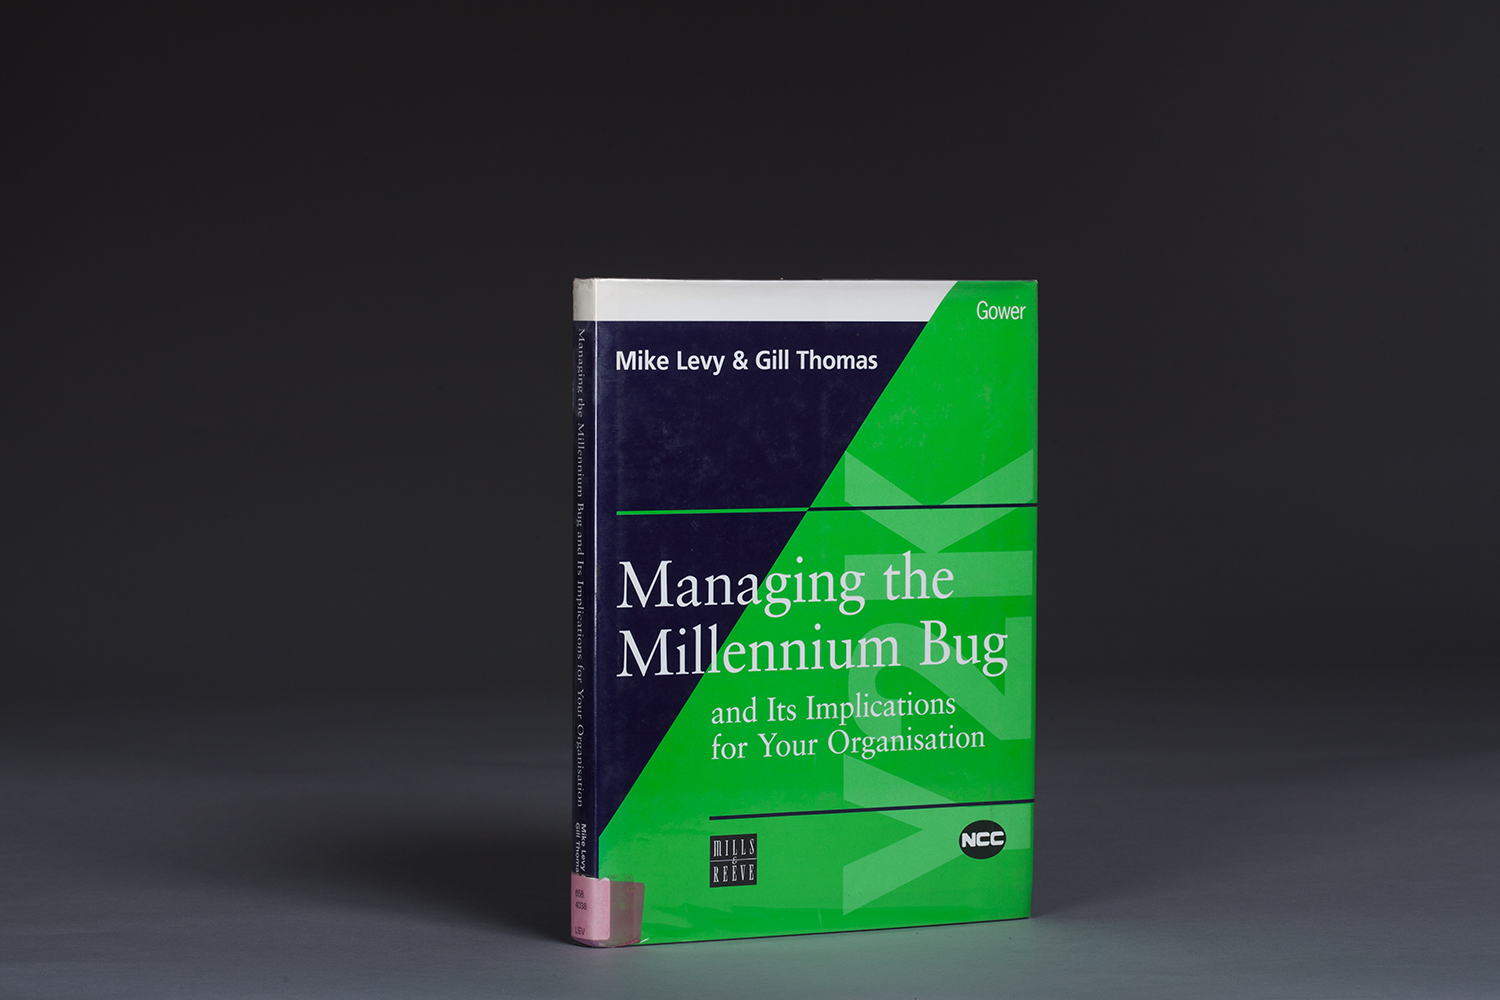 Managing the Millennium Bug and Its Implications for Your Organisation - 0006 Cover.jpg